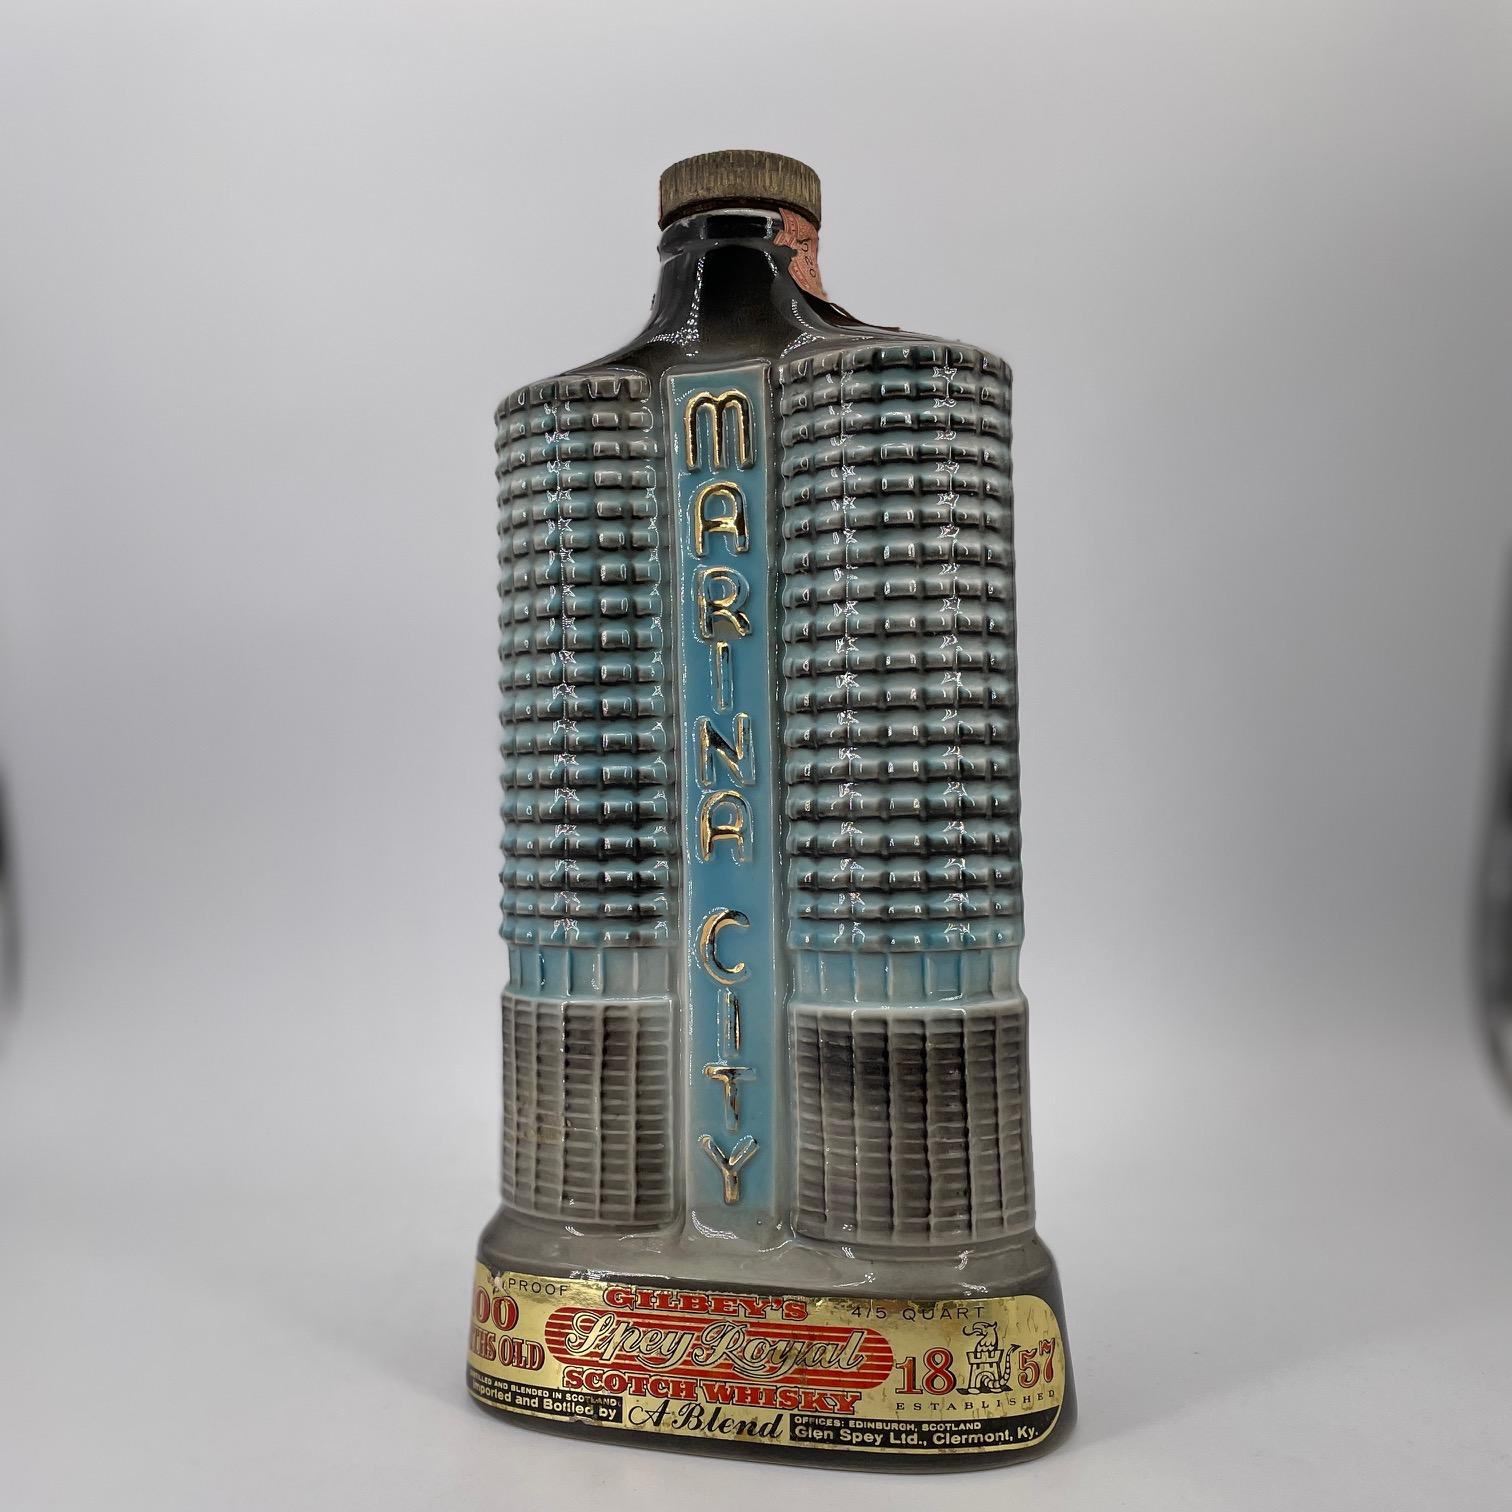 A wonderful piece of decor, a hard to find retro Chicago skyline model of the famous Marina City towers.  Signed, Numbered, Dated 1962, C.Miller for J.B. Beam, etc. in the mold, see image of bottom.  Almost 11 inches tall.  

No chips, No cracks to